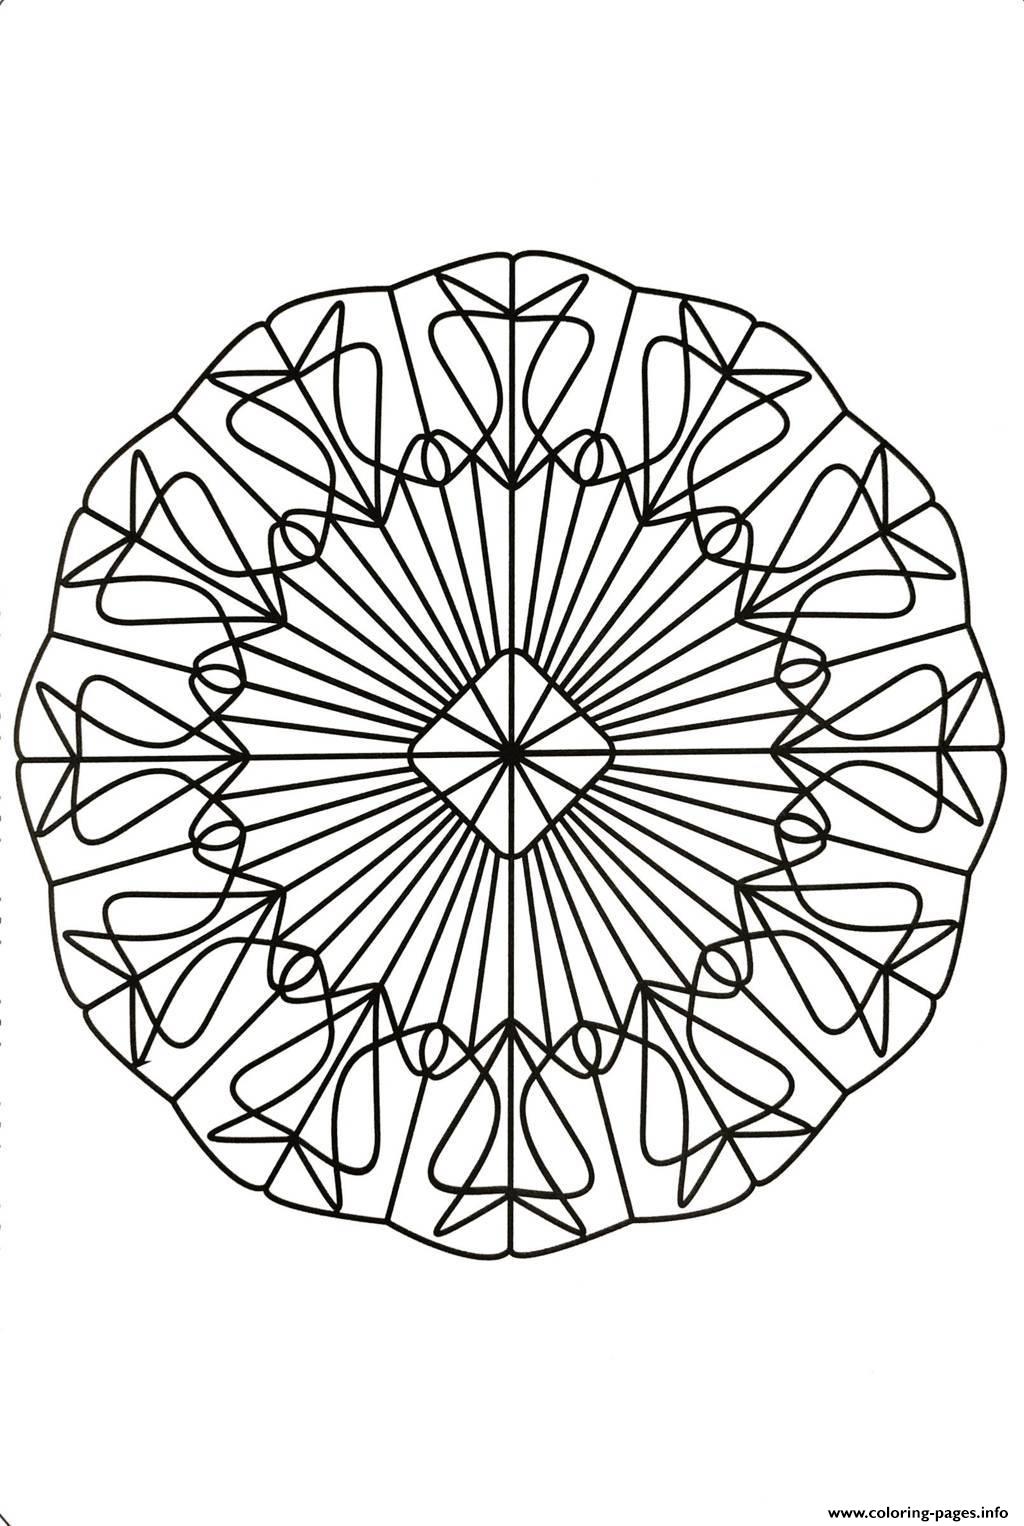 Mandalas To Download For Free 27  coloring